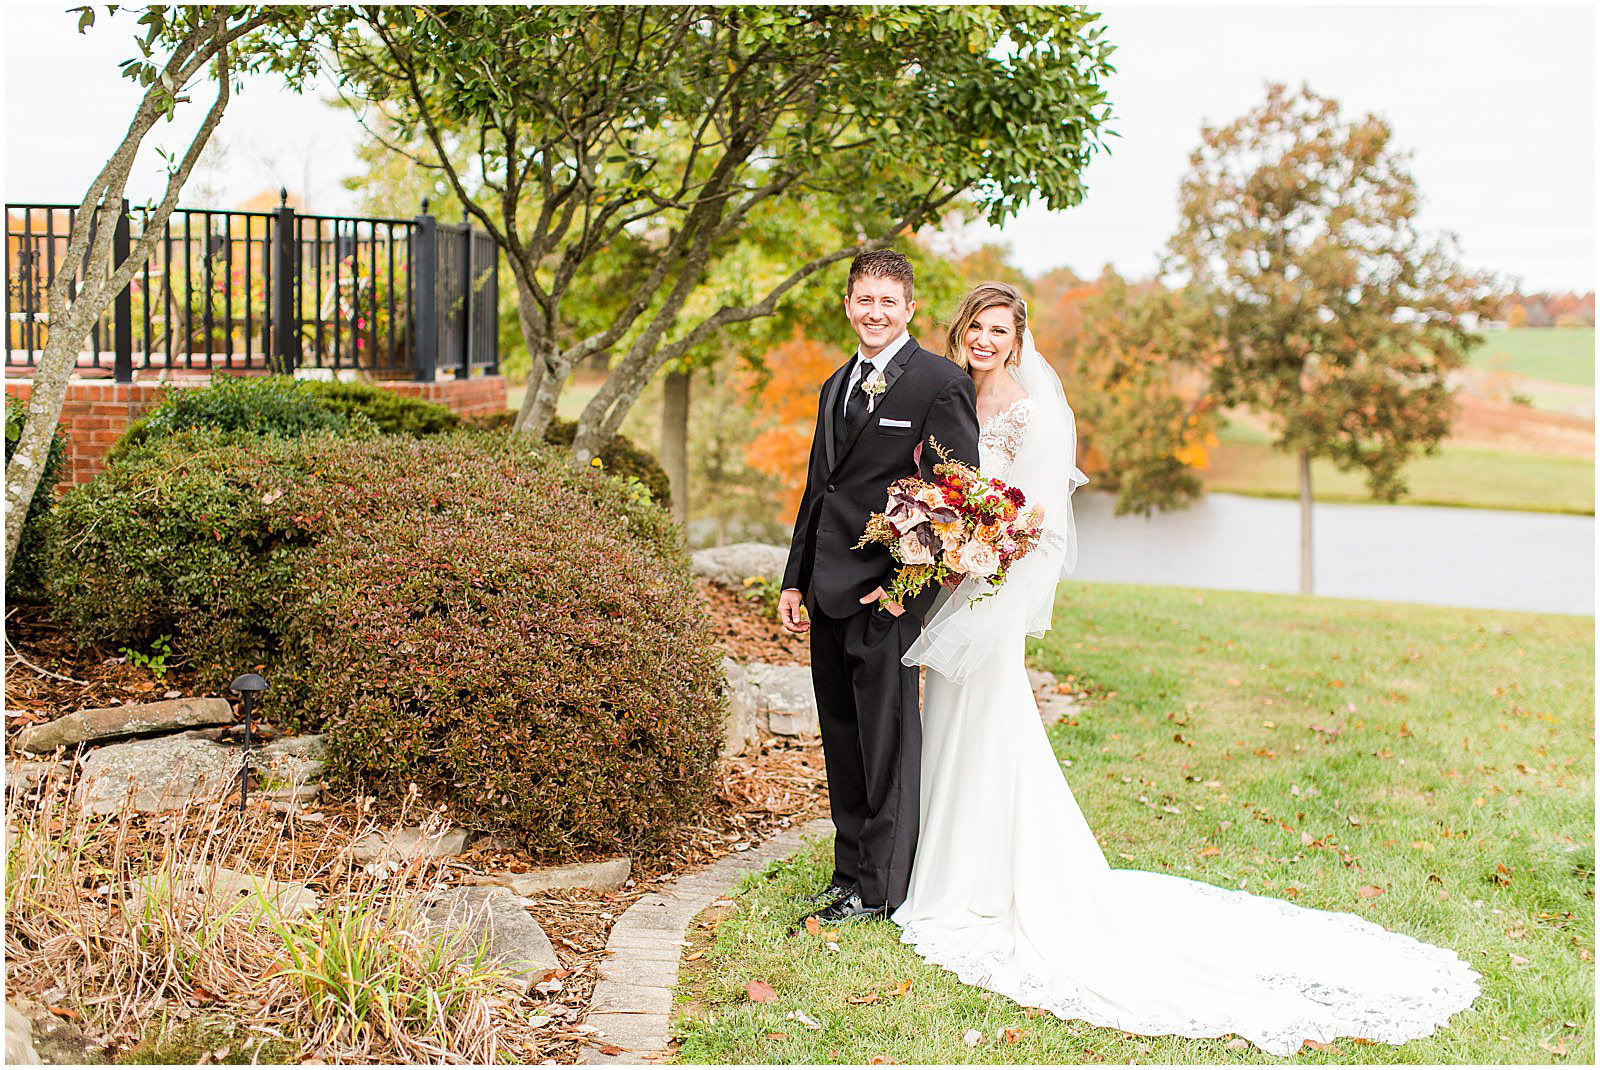 A Romantic Fall Wedding in Ferdinand, IN | Tori and Kyle | Bret and Brandie Photography 0069.jpg